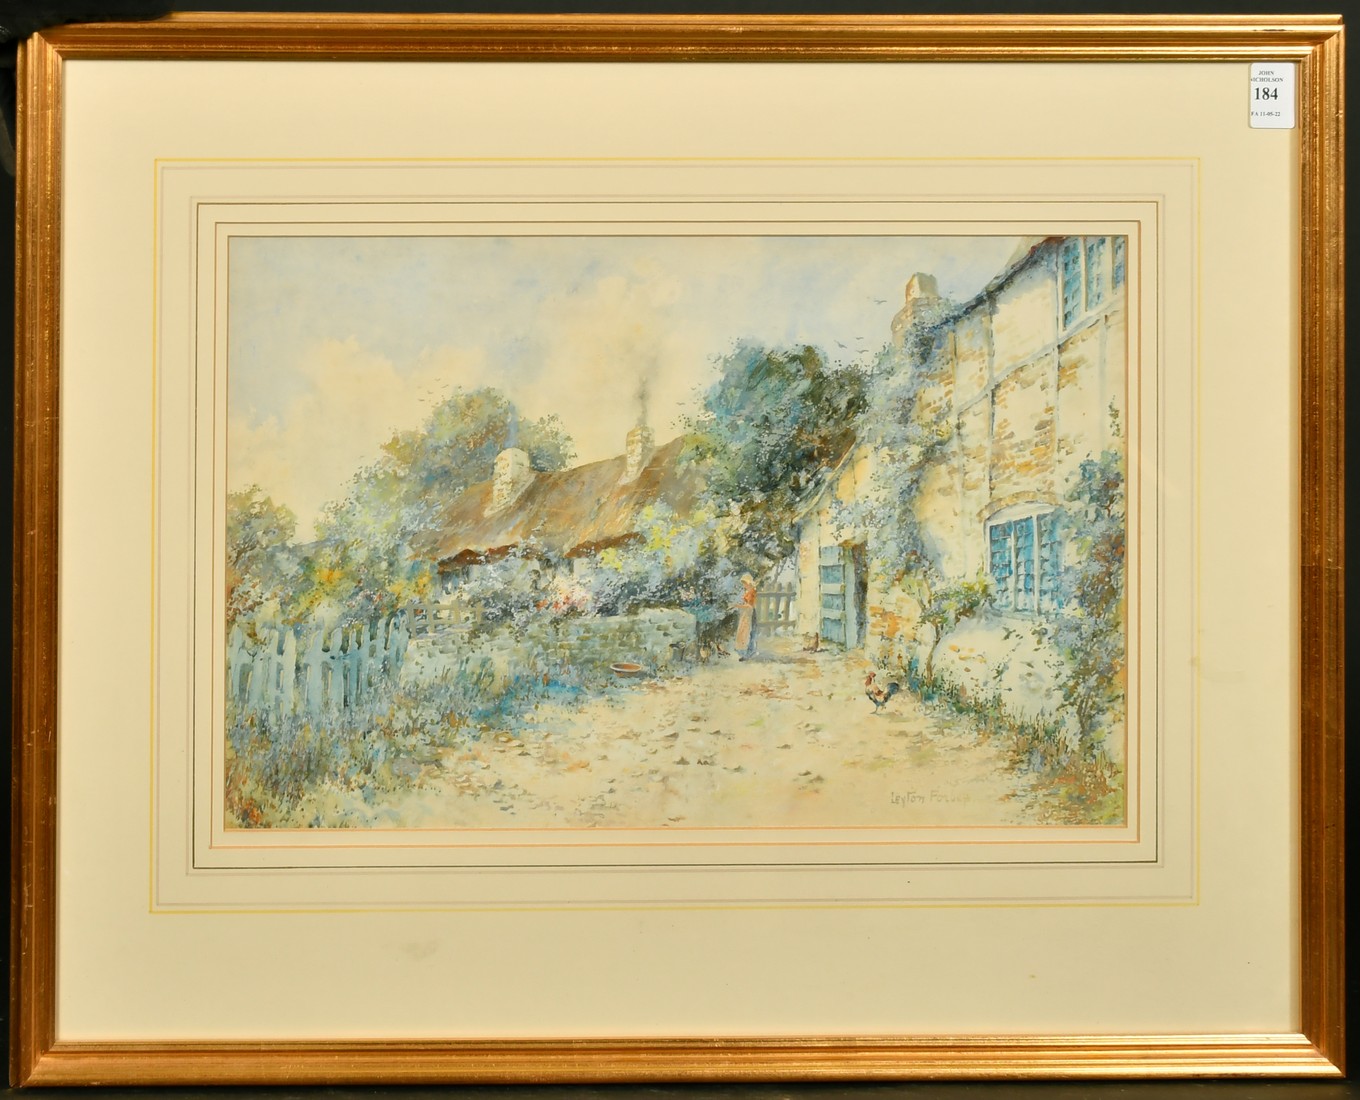 Leyton Forbes (Early 20th Century) British, a female figure outside a country cottage, 11" x 17.5". - Image 2 of 4